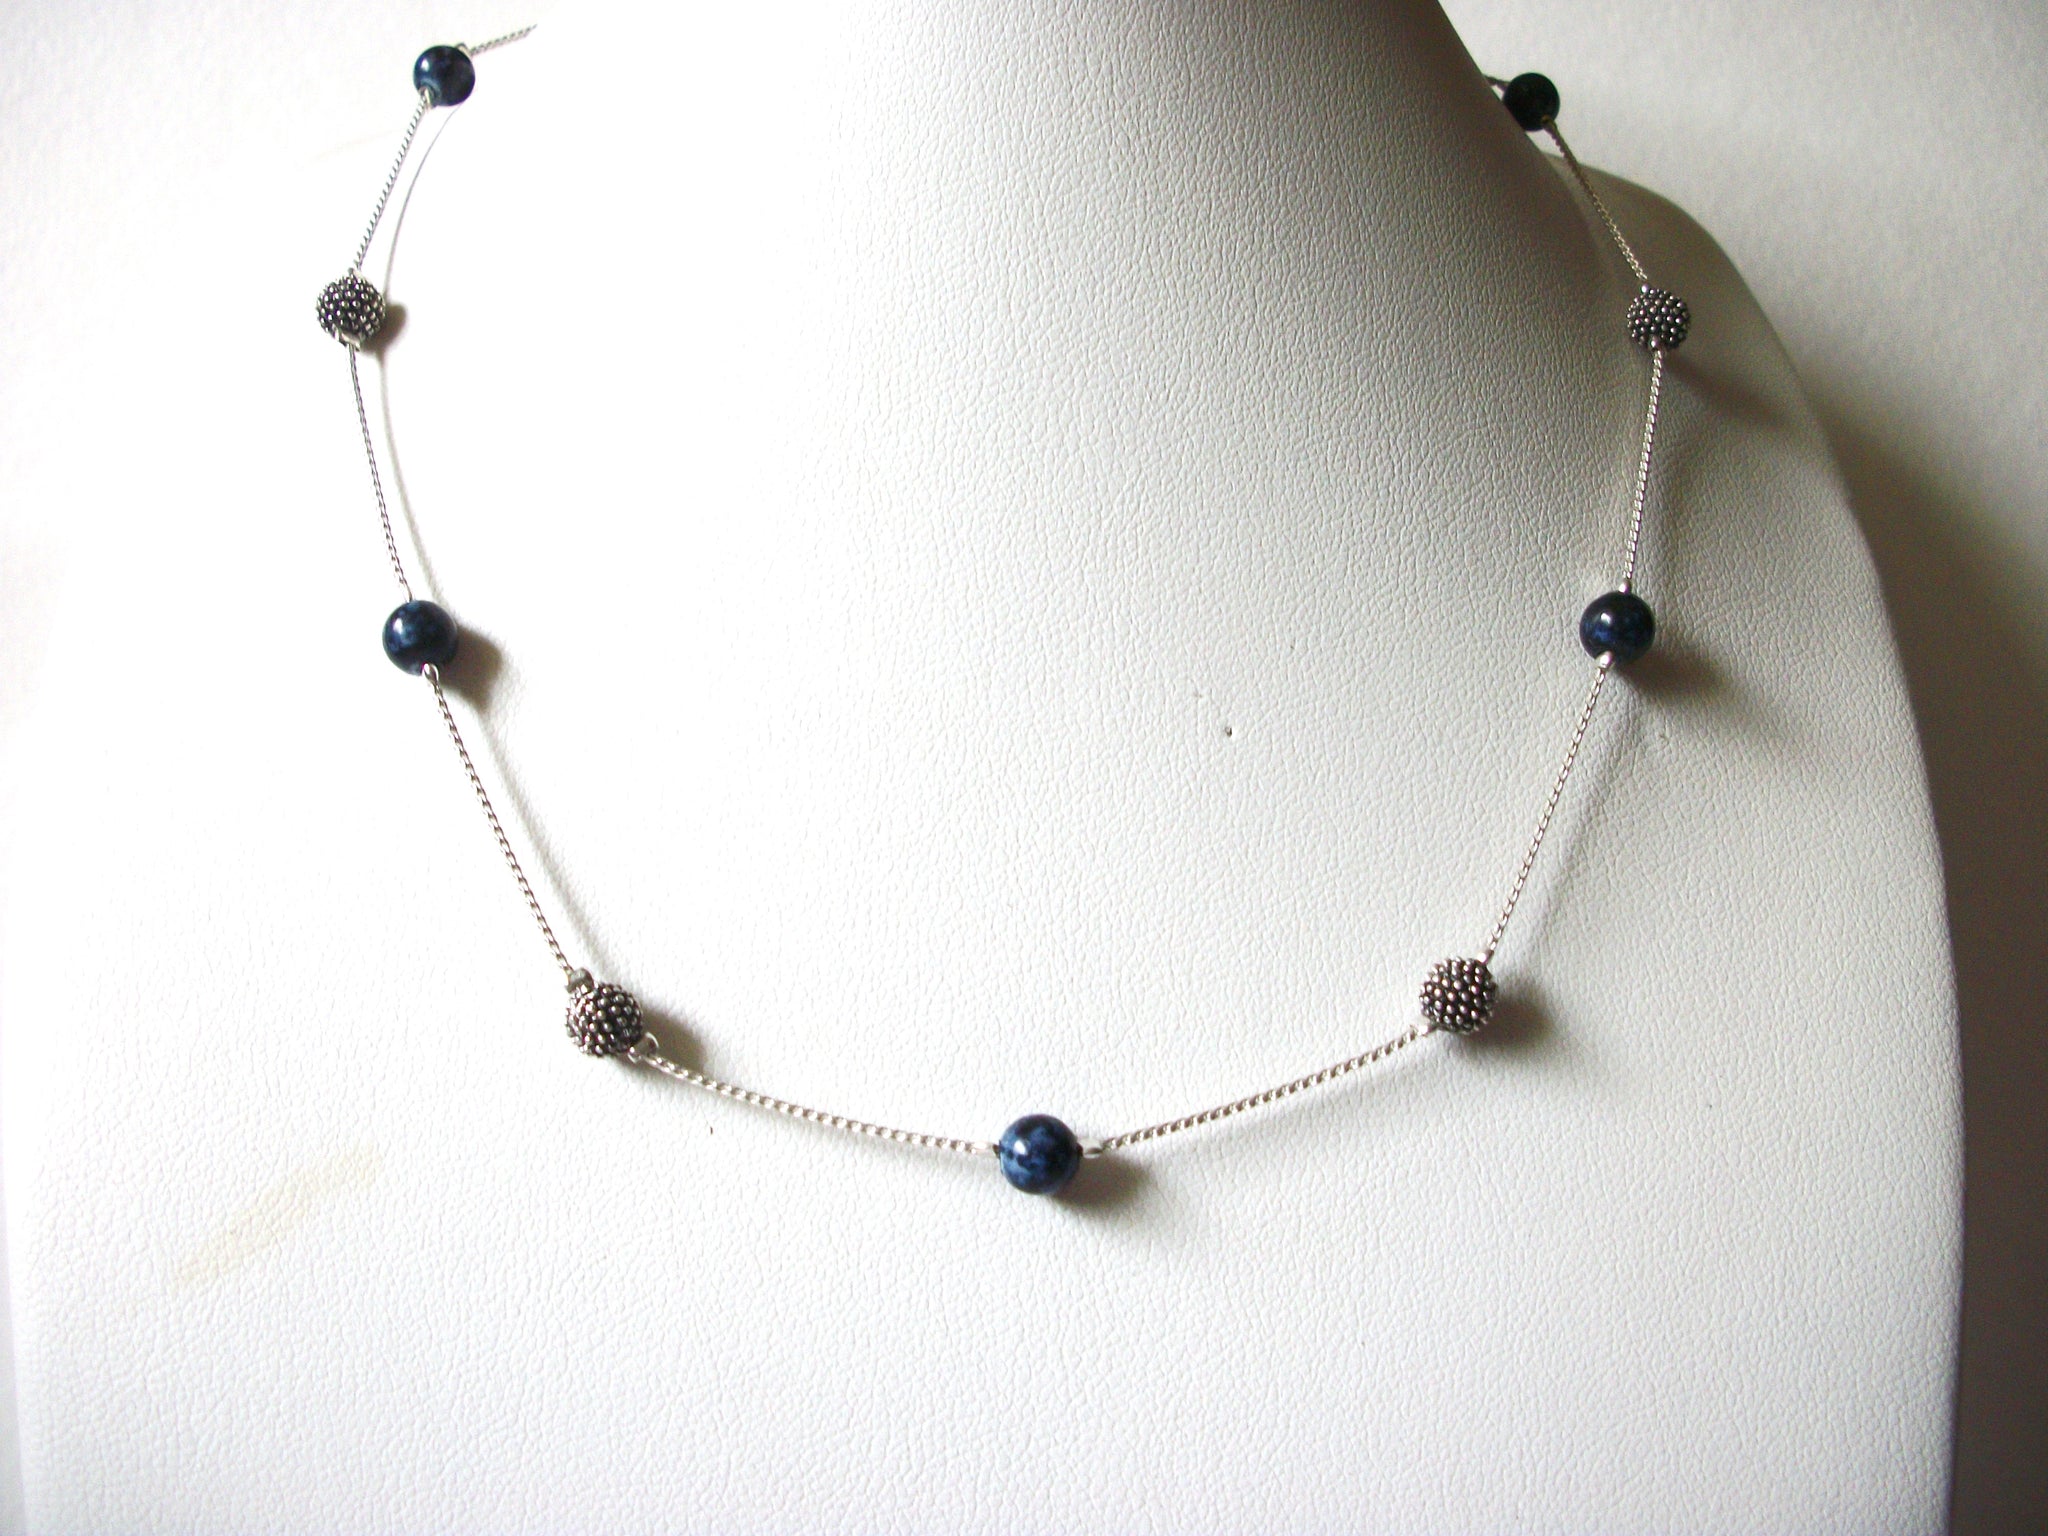 Dainty Vintage Glass Beads Necklace 80520